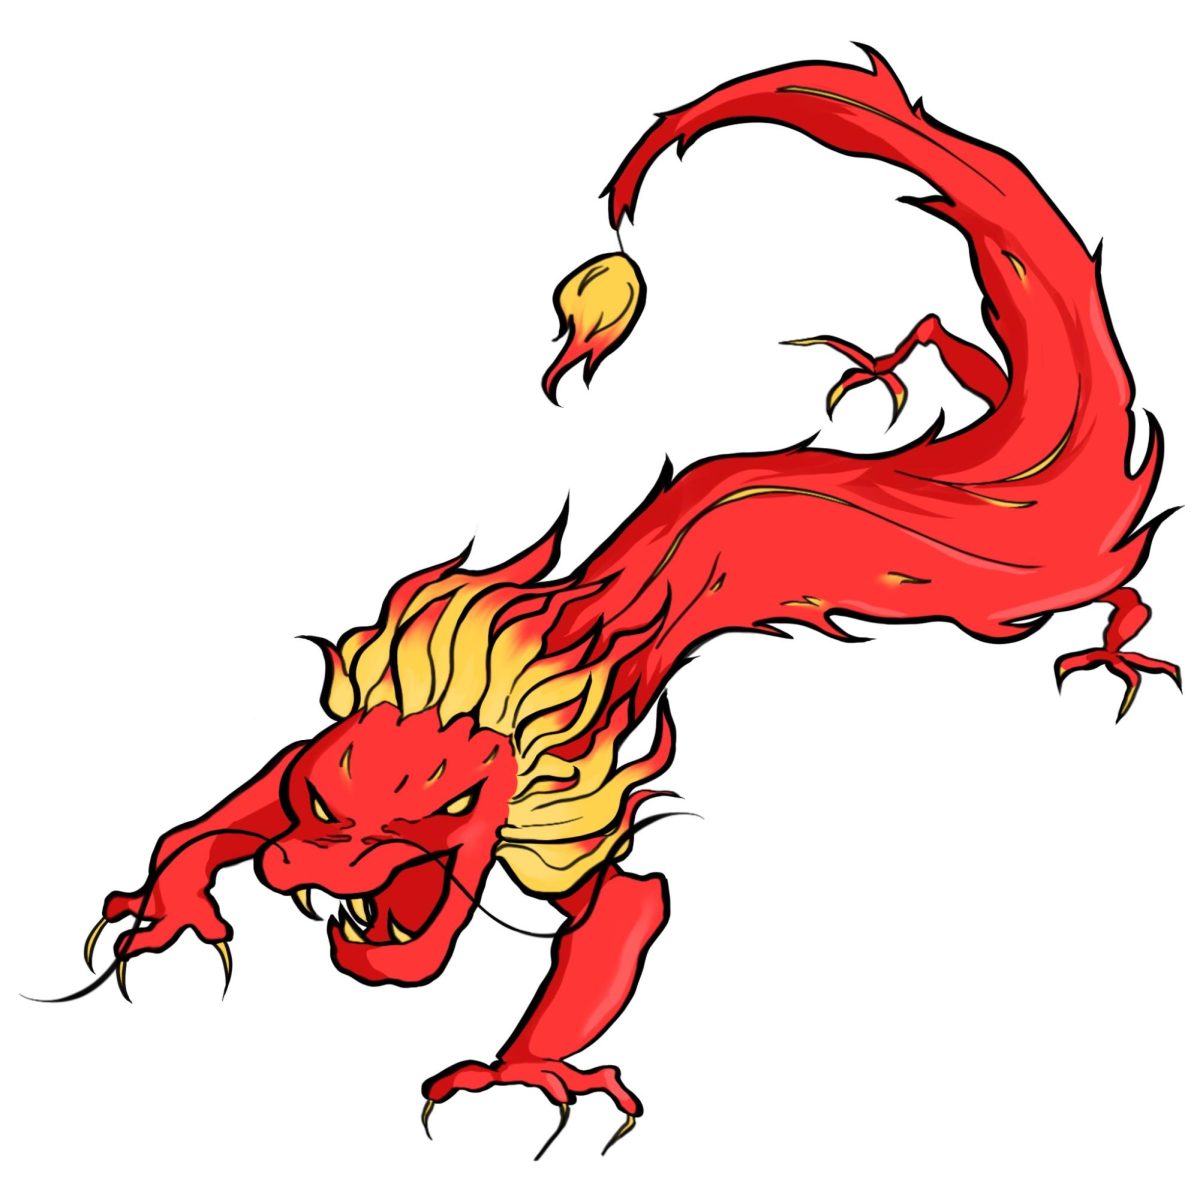 2024: The Year of the Dragon to Bring Prosperity